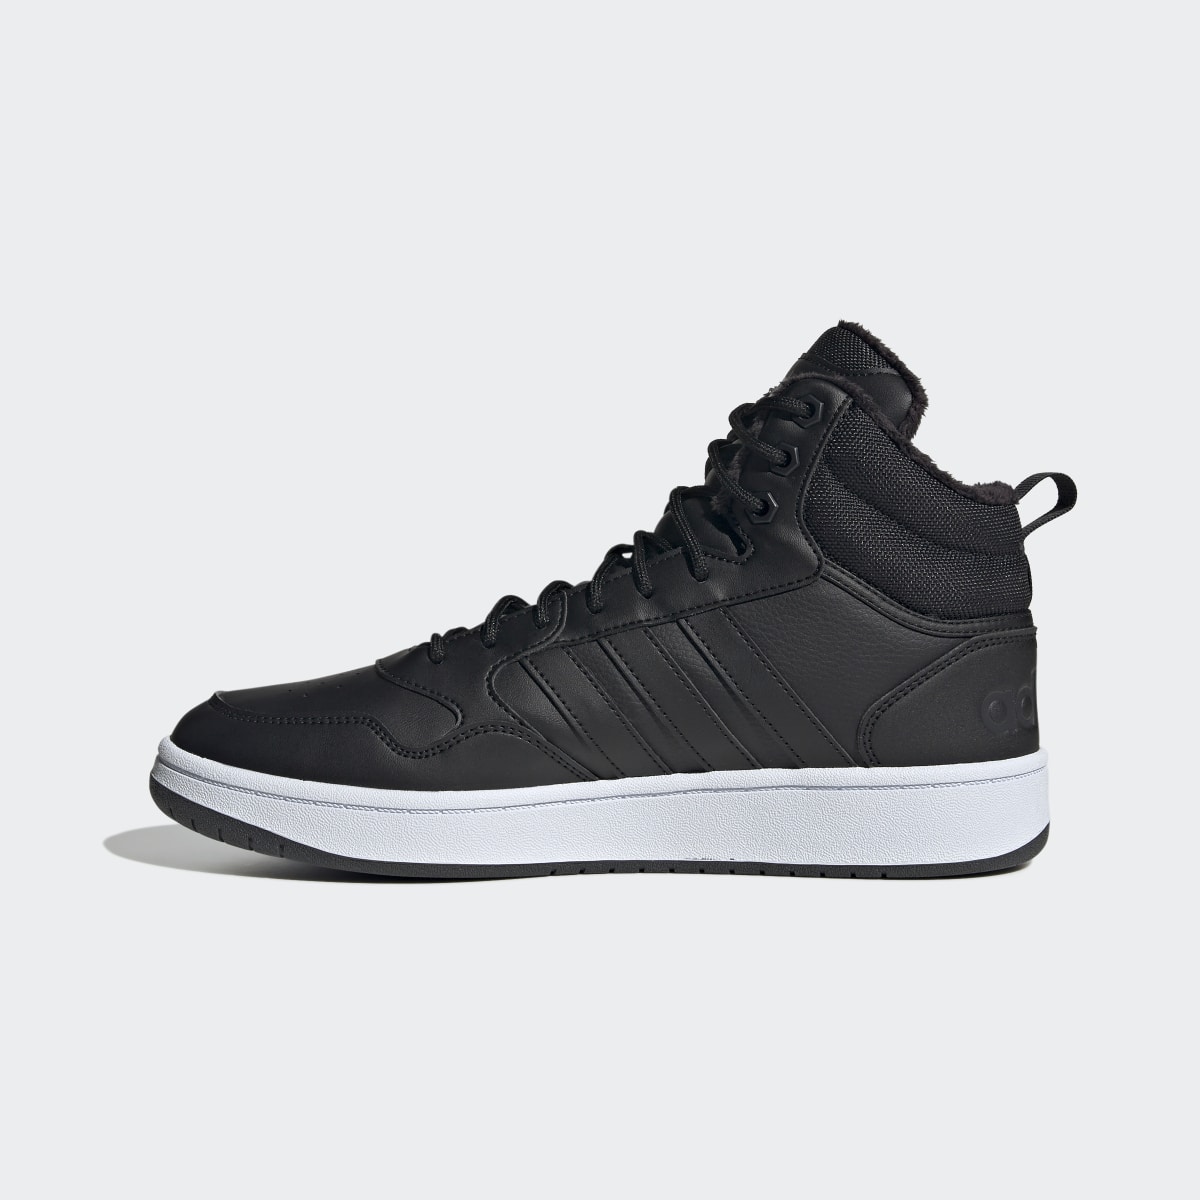 Adidas Chaussure Hoops 3.0 Mid Lifestyle Basketball Classic Fur Lining Winterized. 7